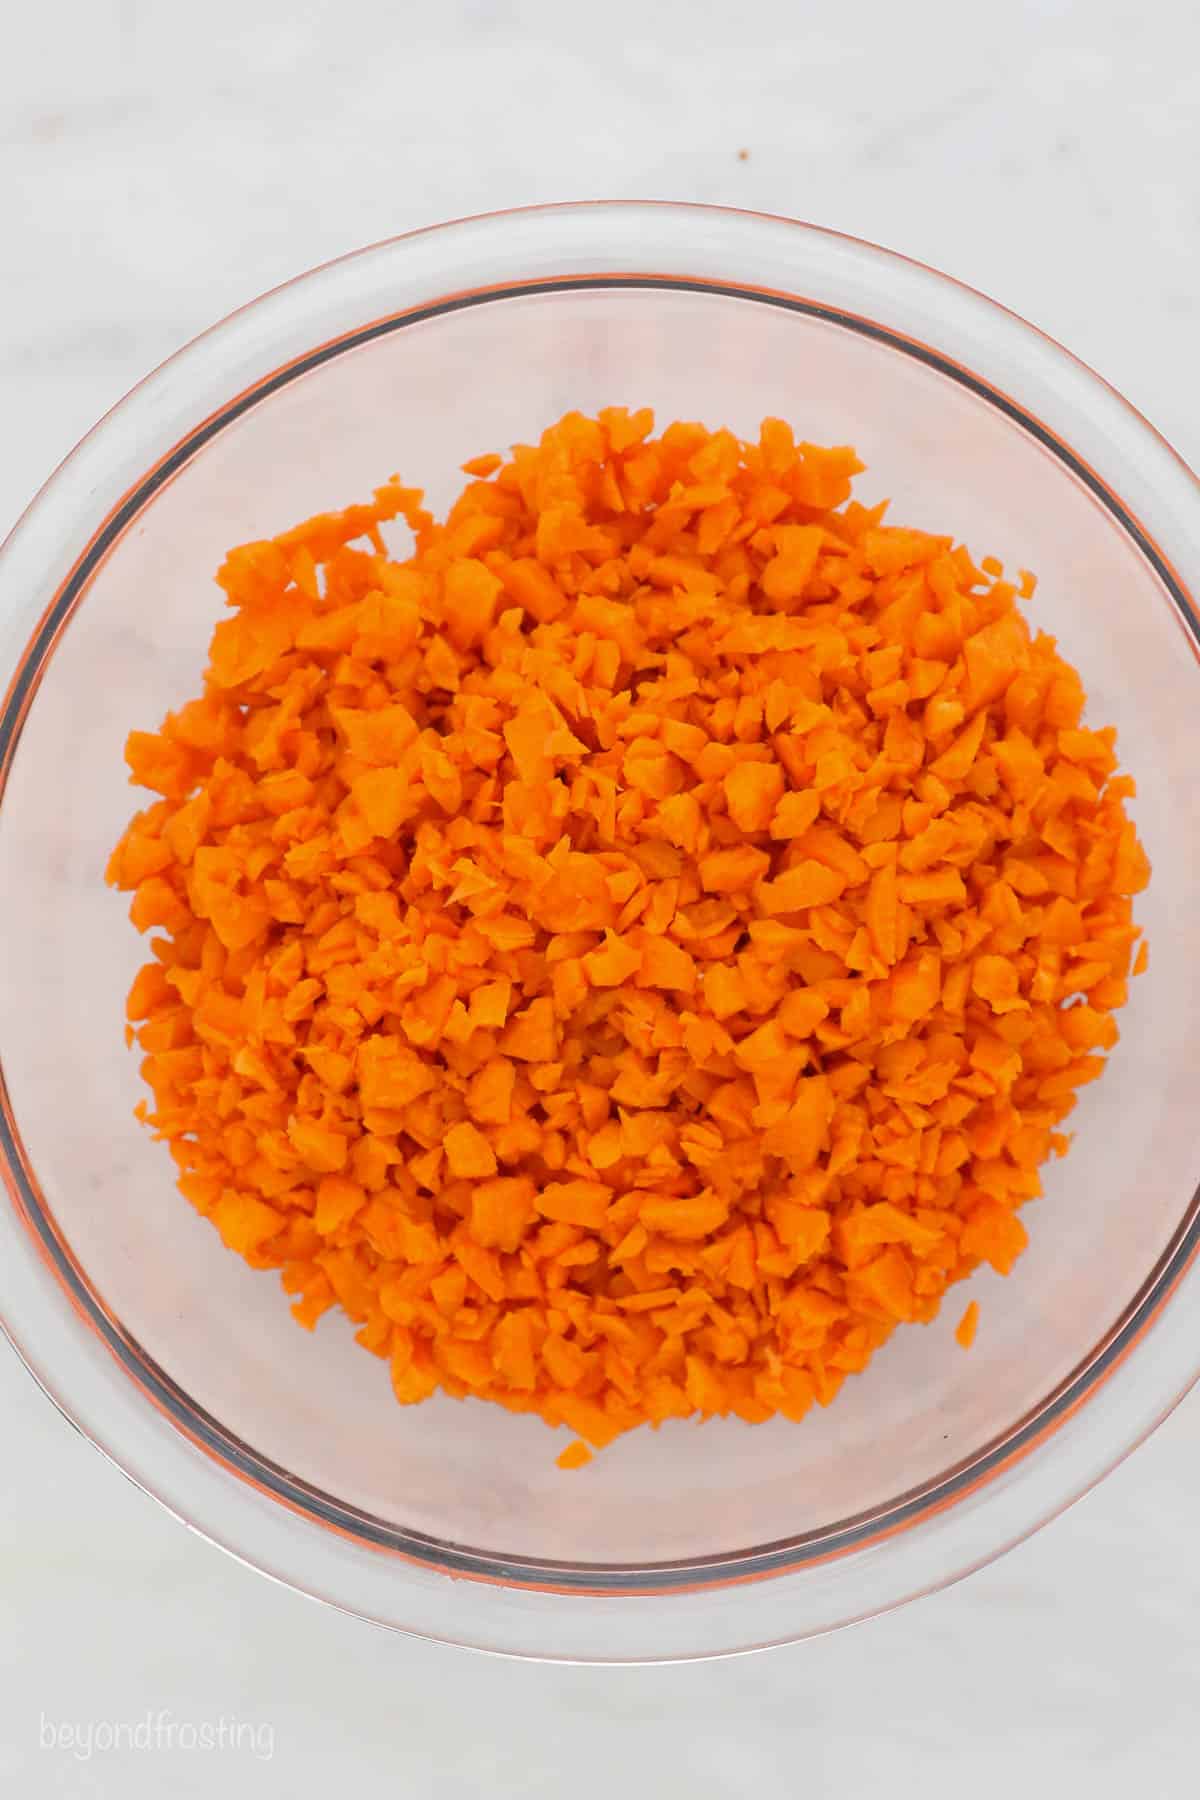 A glass mixing bowl filled with shredded carrots on a kitchen countertop